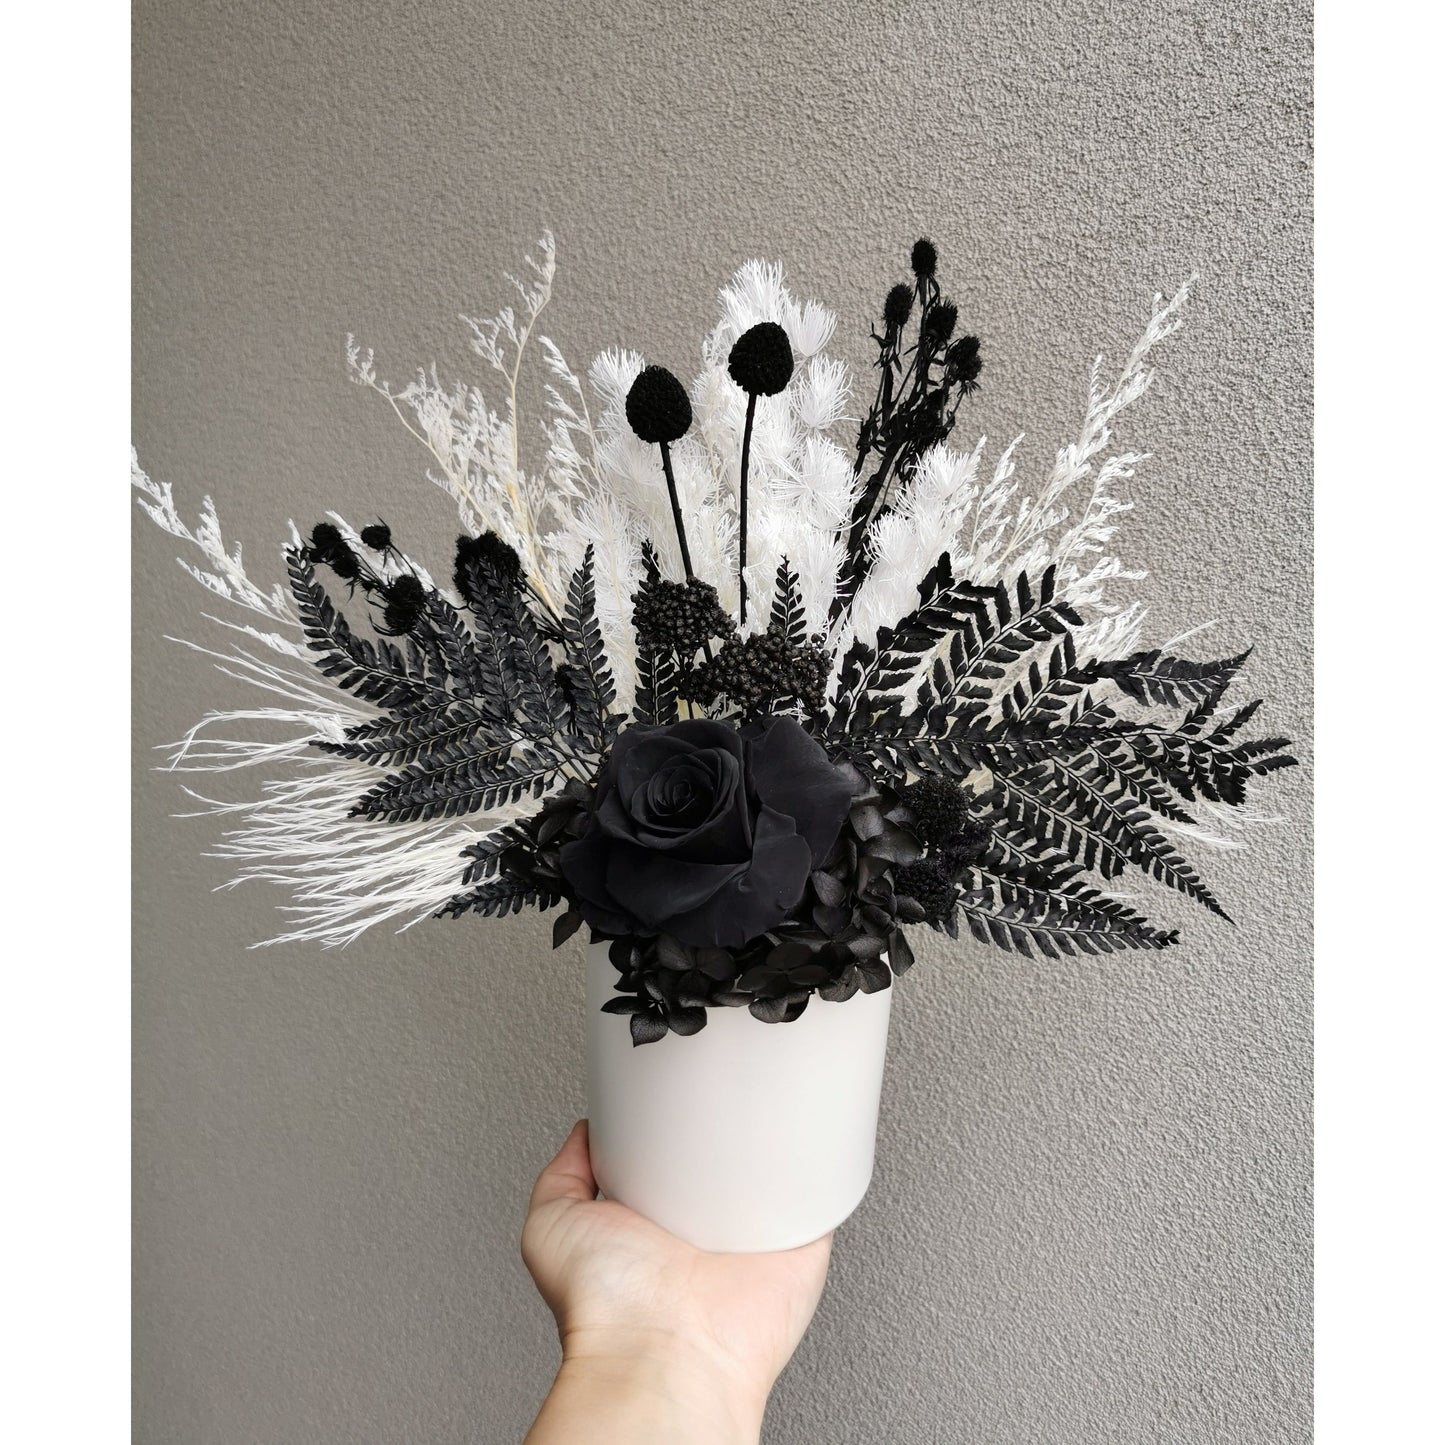 Black & White dried & preserved flower arrangement with a black rose and set in to a white pot. Photo shows the arrangement being held by hand against a blank wall